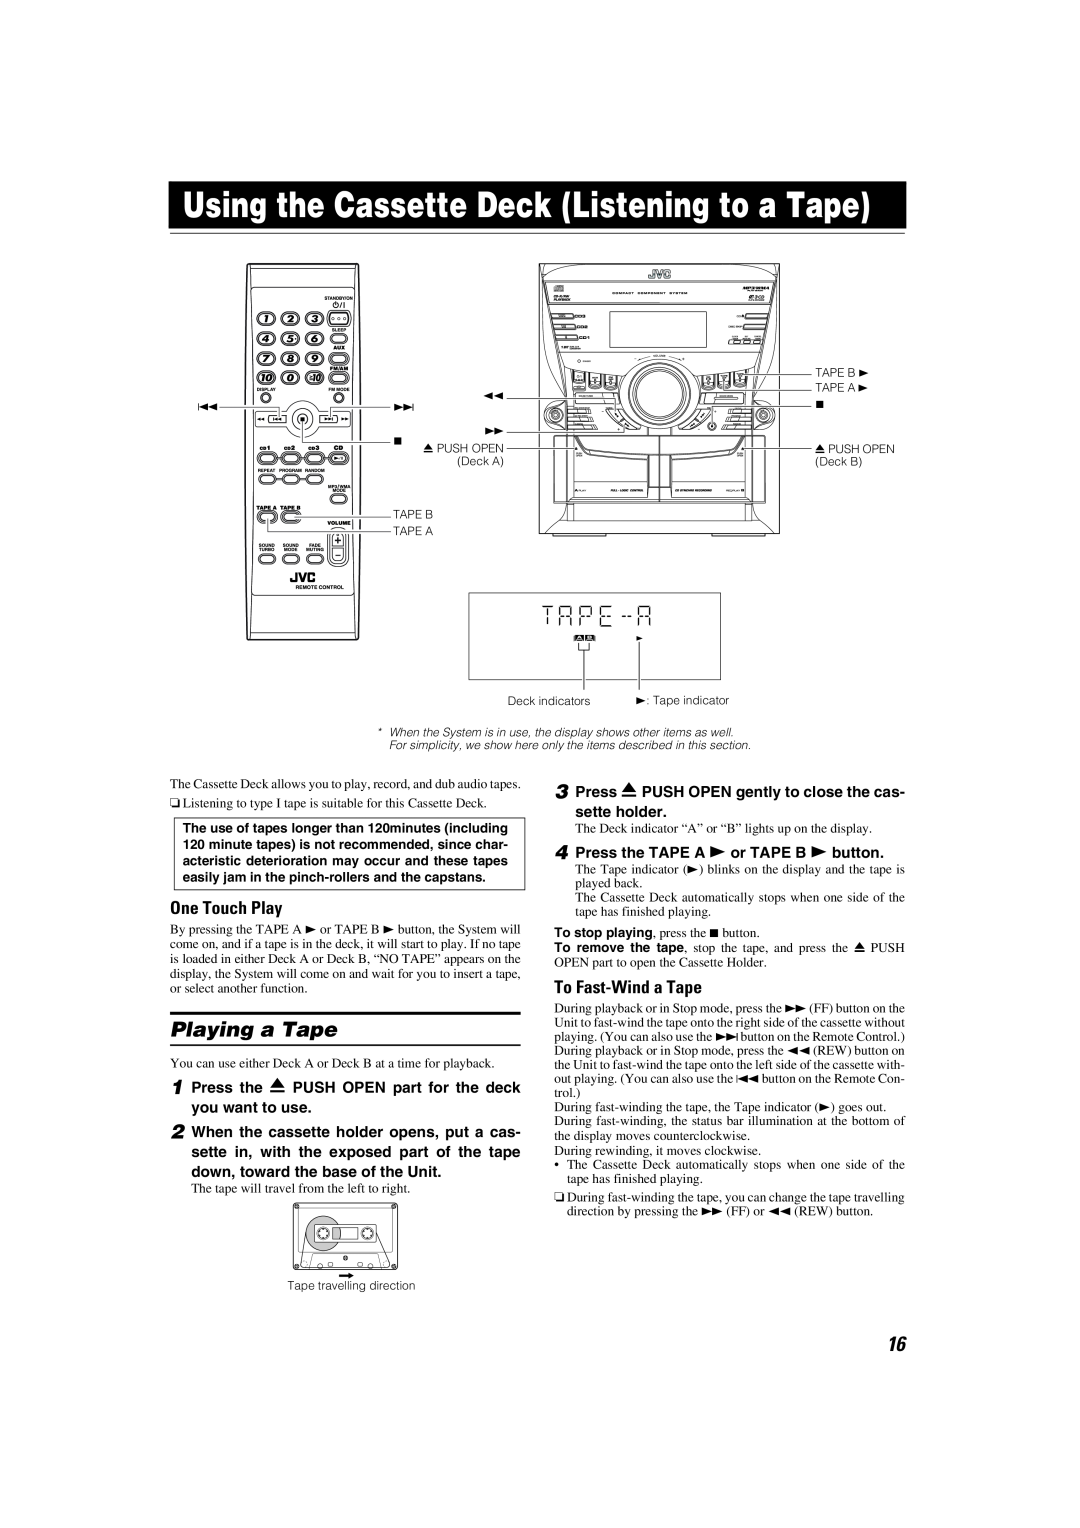 JVC MX-KC45 manual Using the Cassette Deck Listening to a Tape, Playing a Tape, To Fast-Winda Tape, One Touch Play 